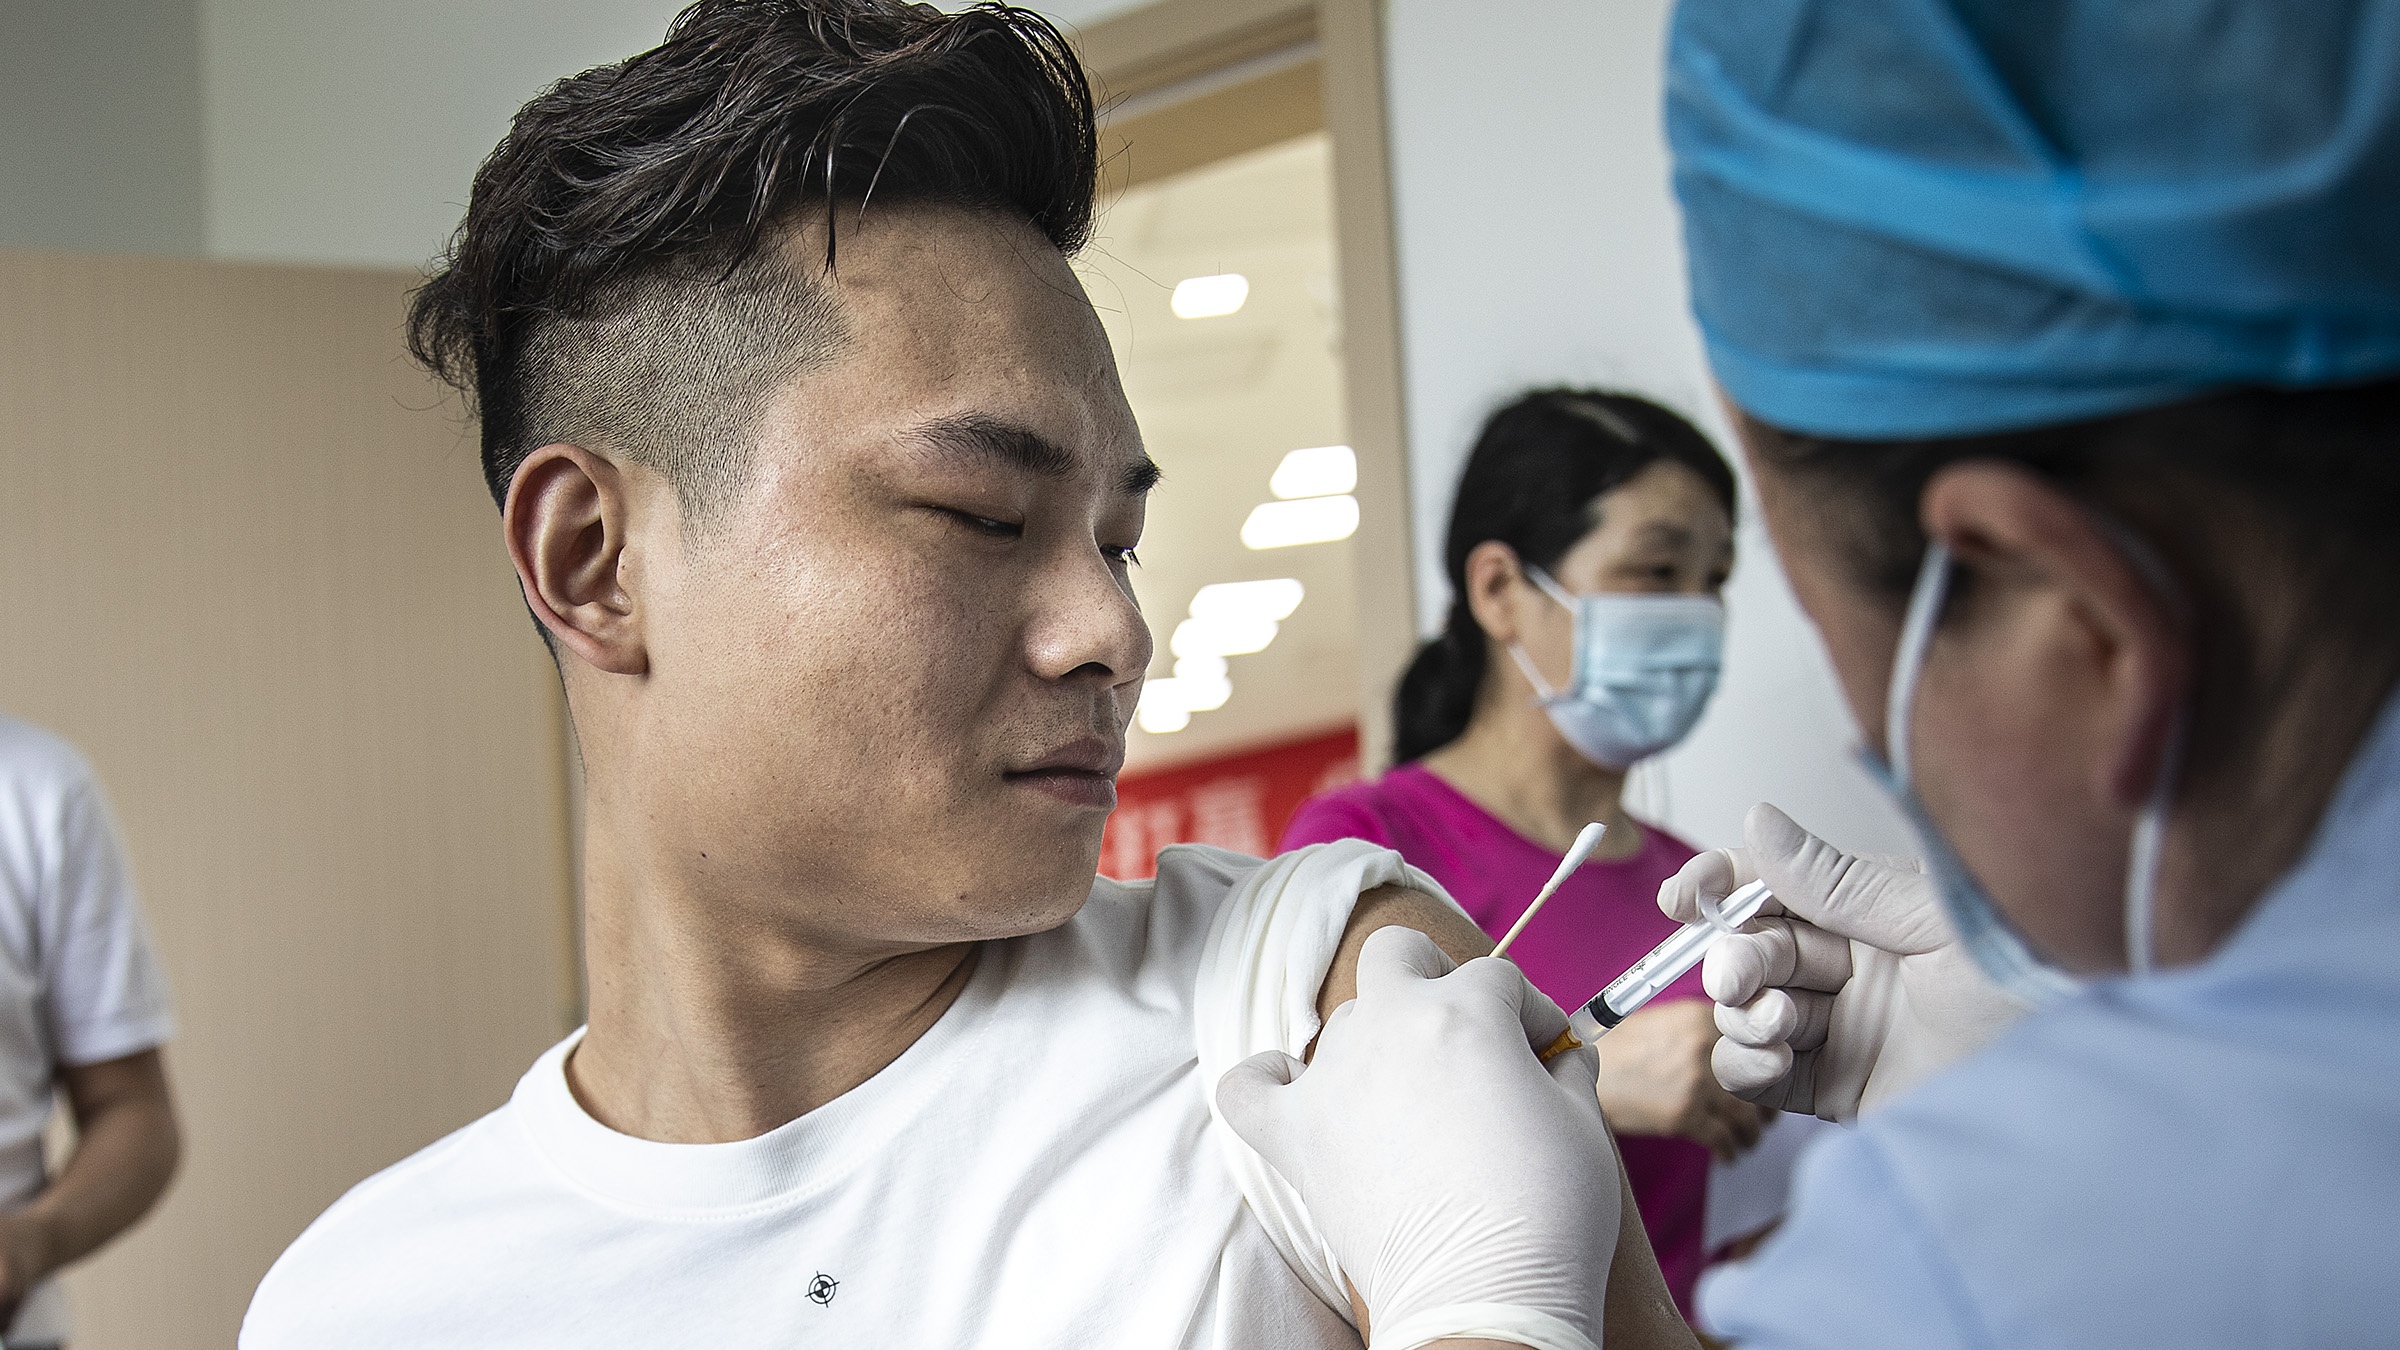 A man receives a Covid-19 vaccine in Wuhan, Hubei province